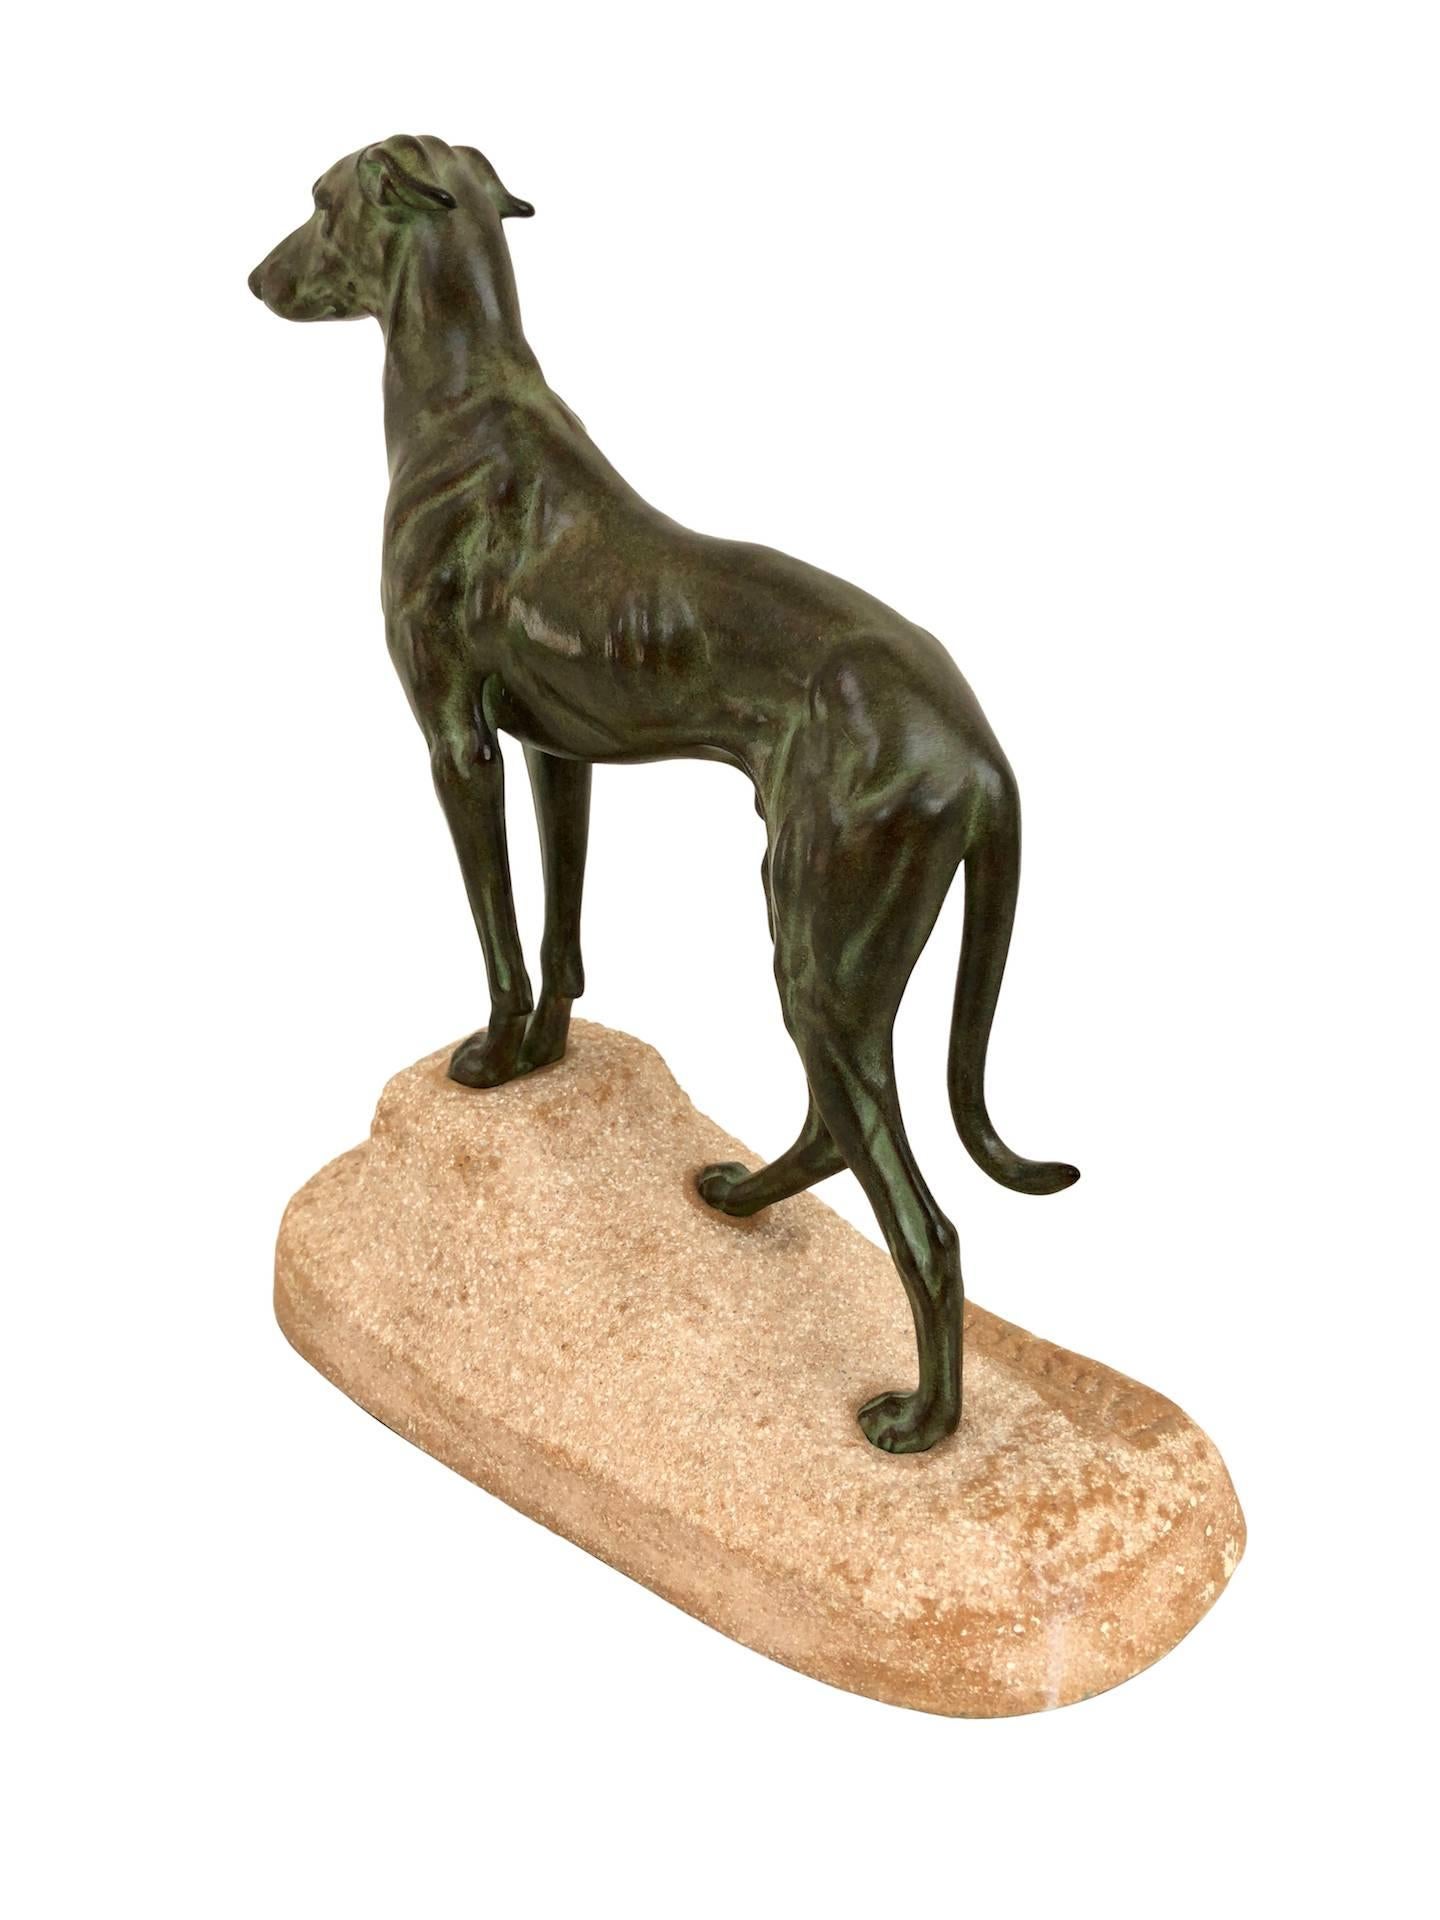 Contemporary Greyhound Dog Sculpture Sloughi by Jules Edmond Masson for Max Le Verrier